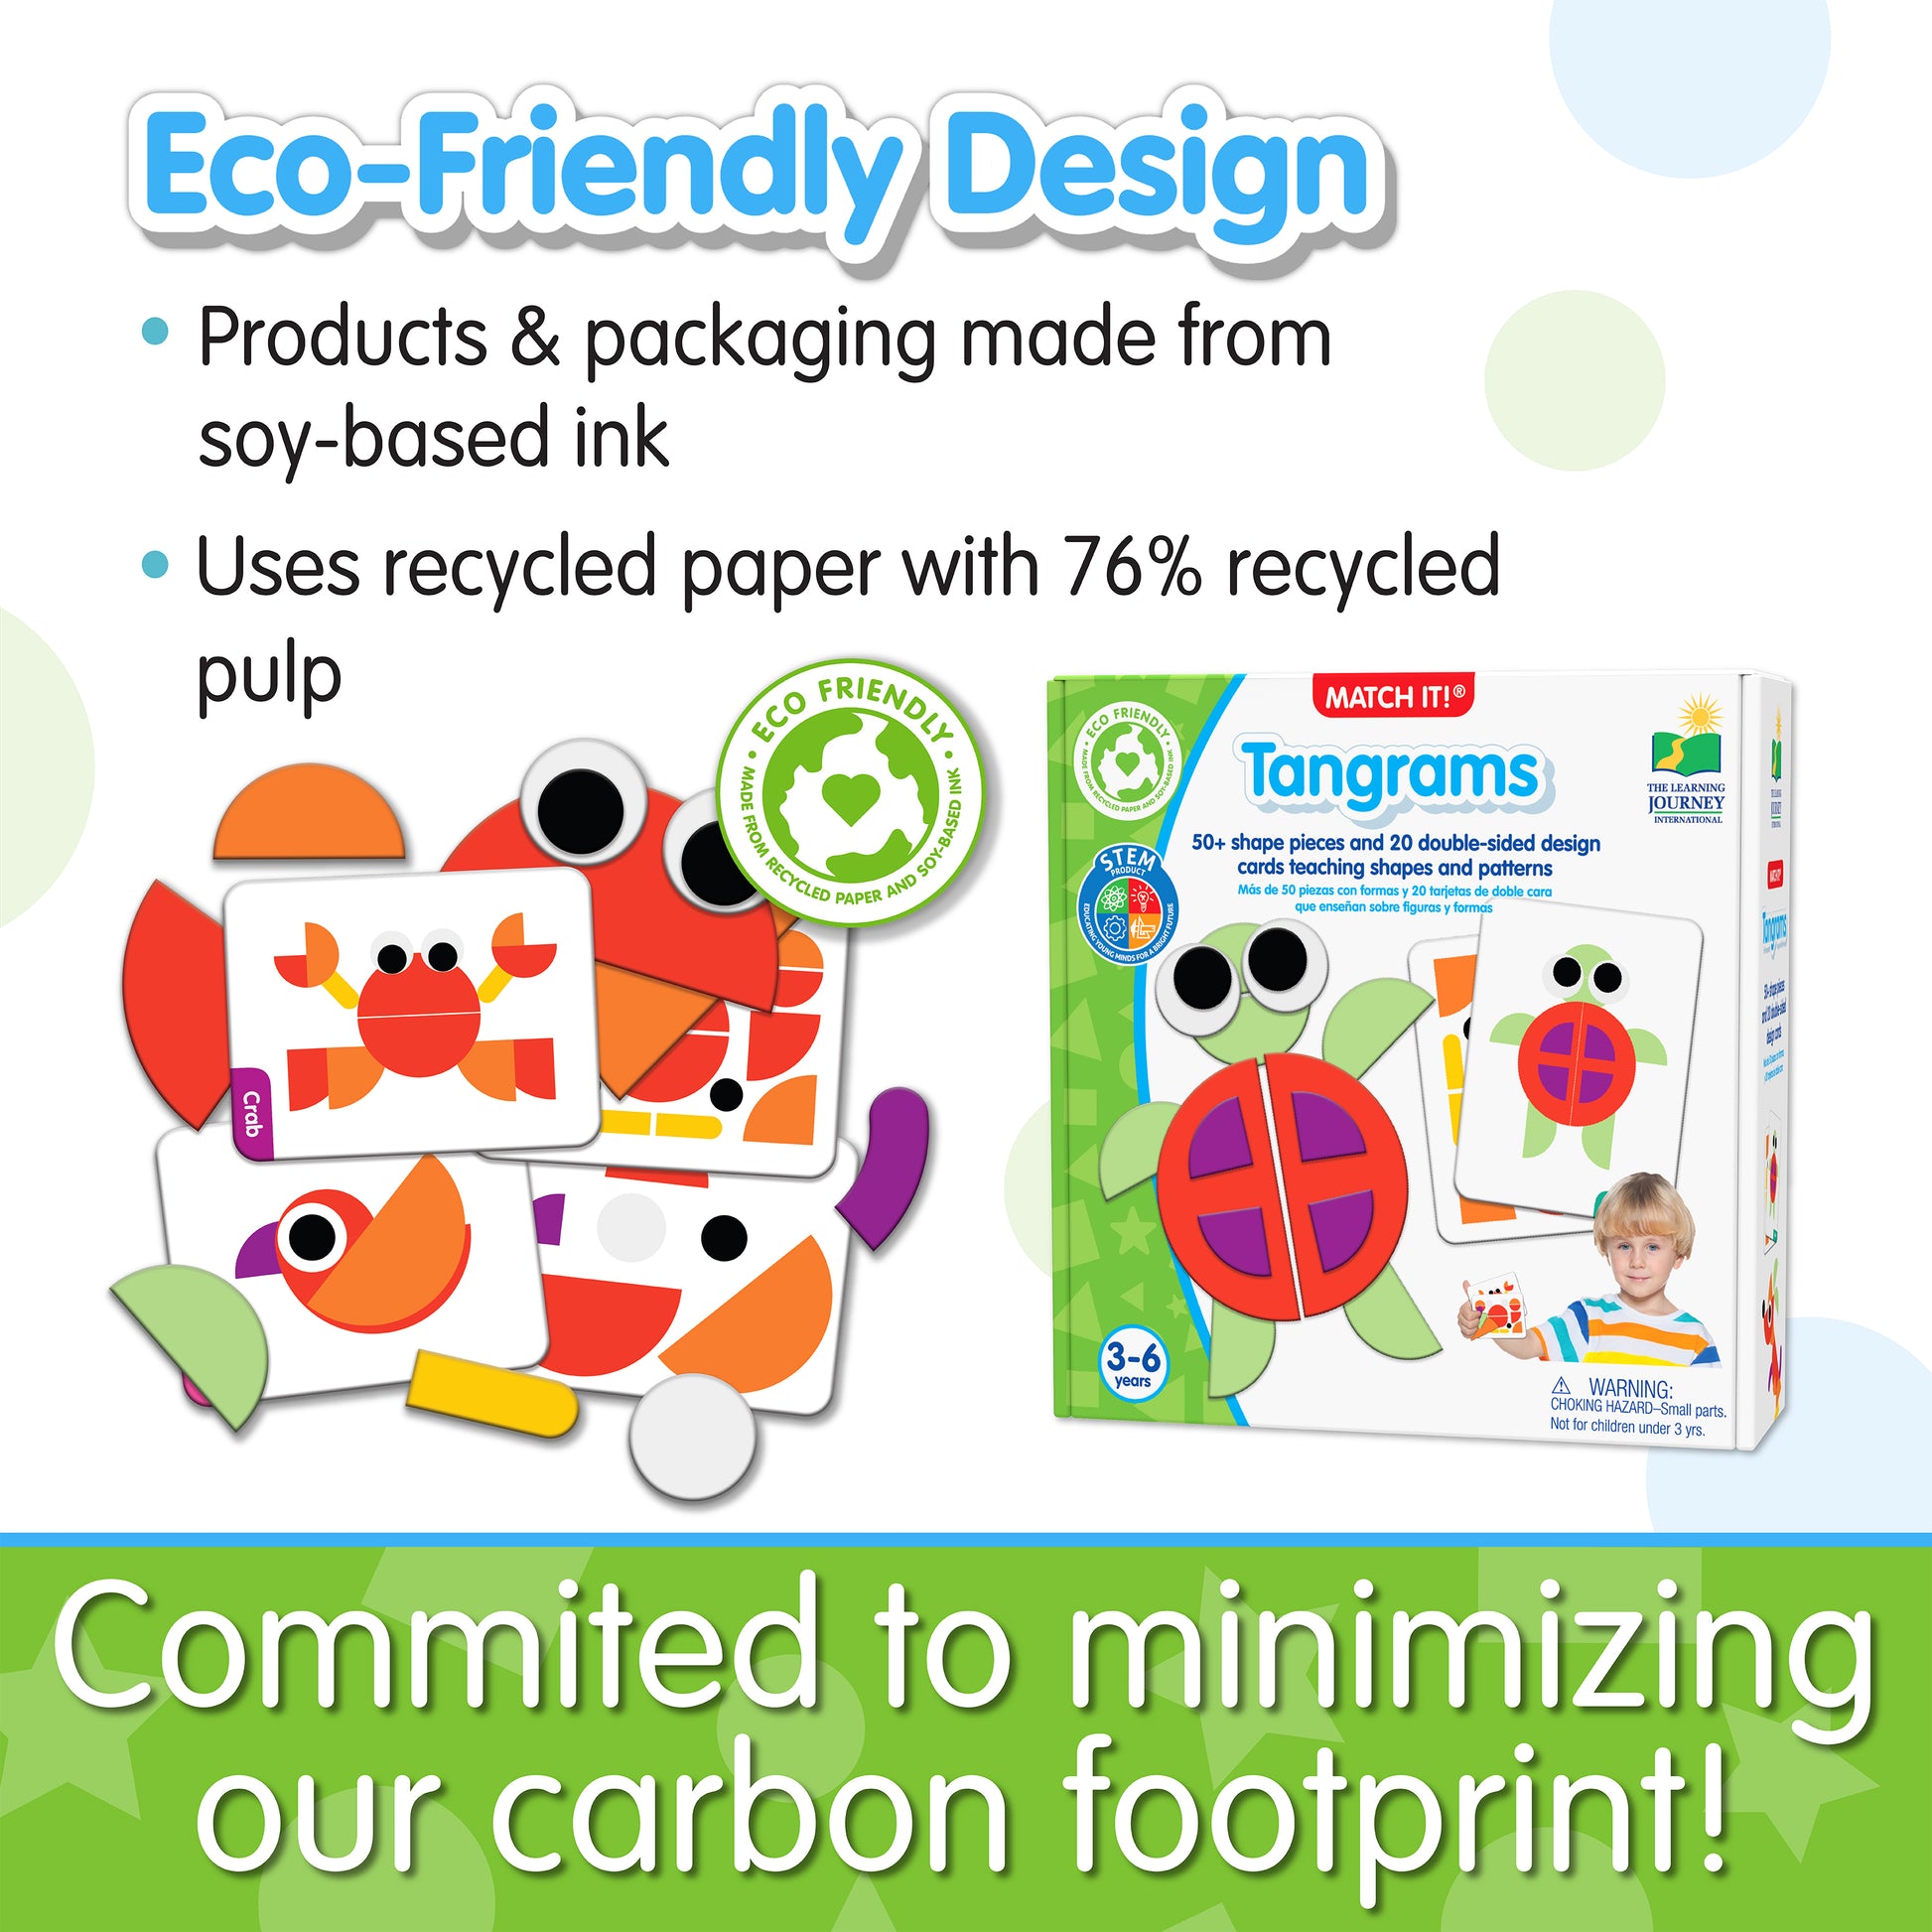 Infographic about Match It - Tangrams' eco-friendly design that says, "Committed to minimizing our carbon footprint!"